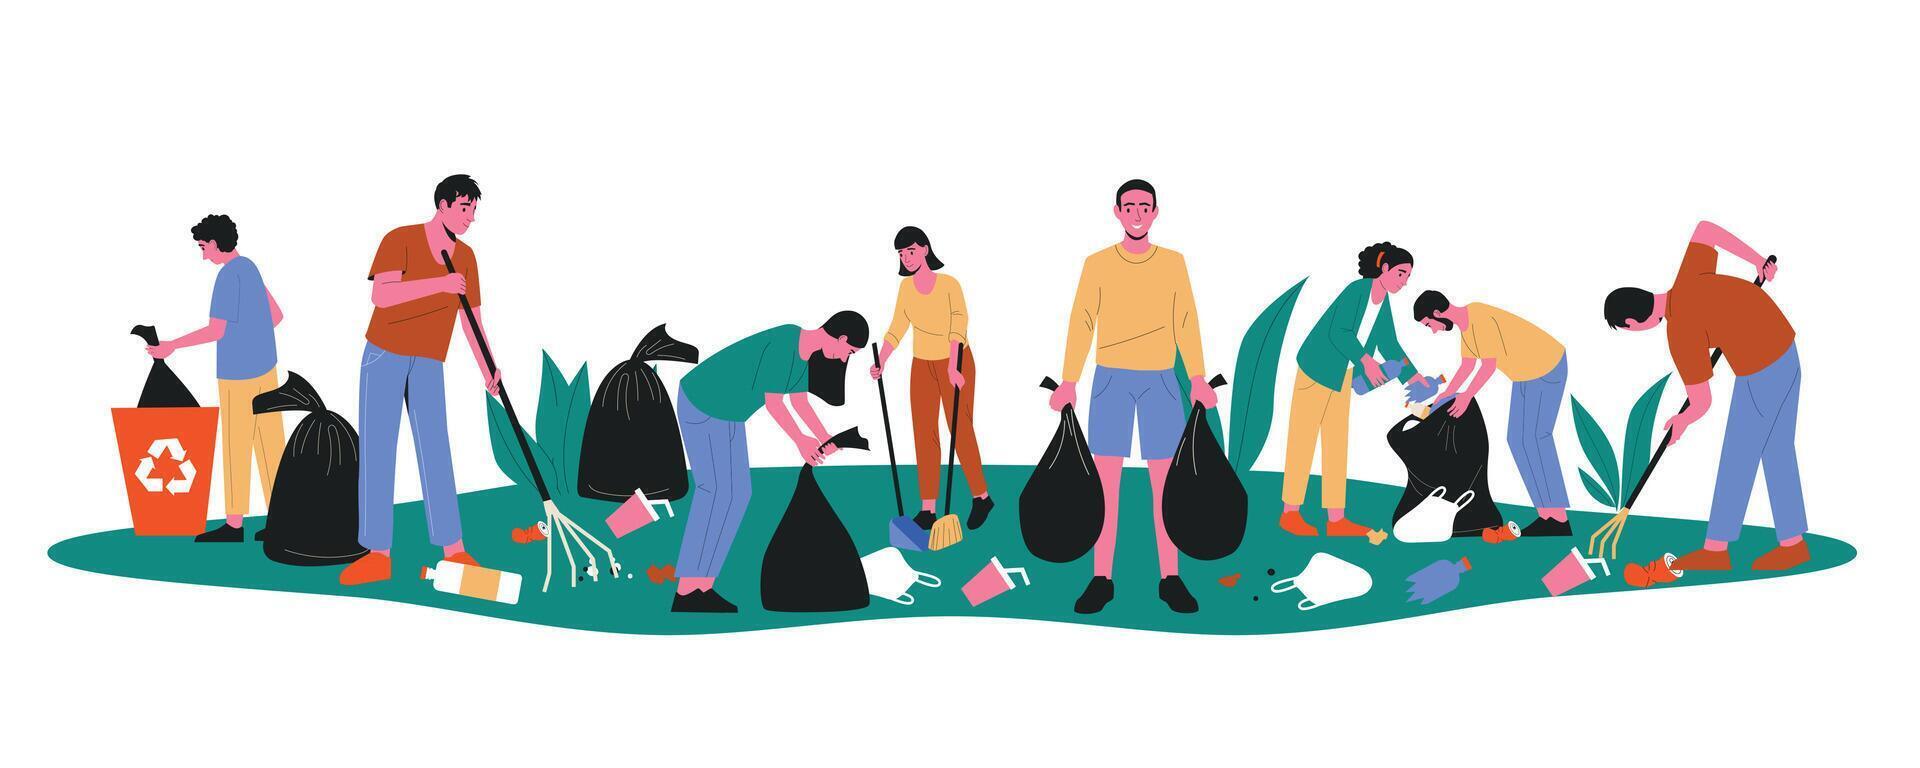 Volunteers cleaning up parks. Cartoon people characters collecting litter picking plastic waste raking garbage, eco voluntary activist. Vector flat illustration